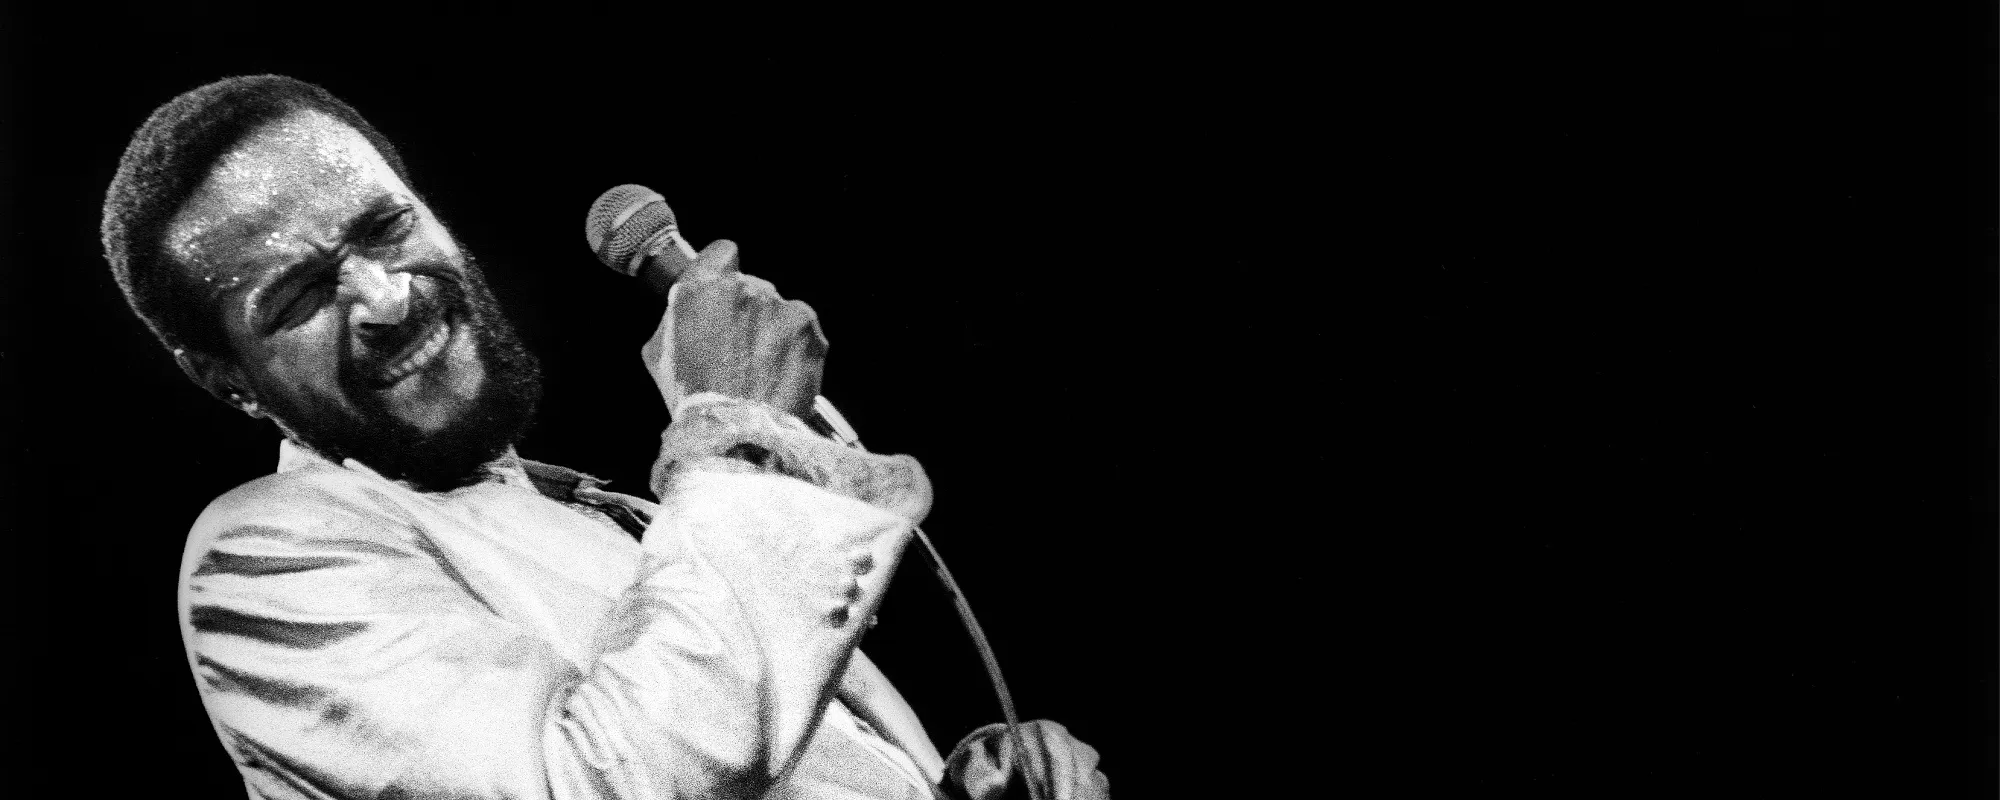 18 Previously Unreleased Songs on 50th Anniversary Edition of Marvin Gaye’s Iconic ‘Let’s Get it On’